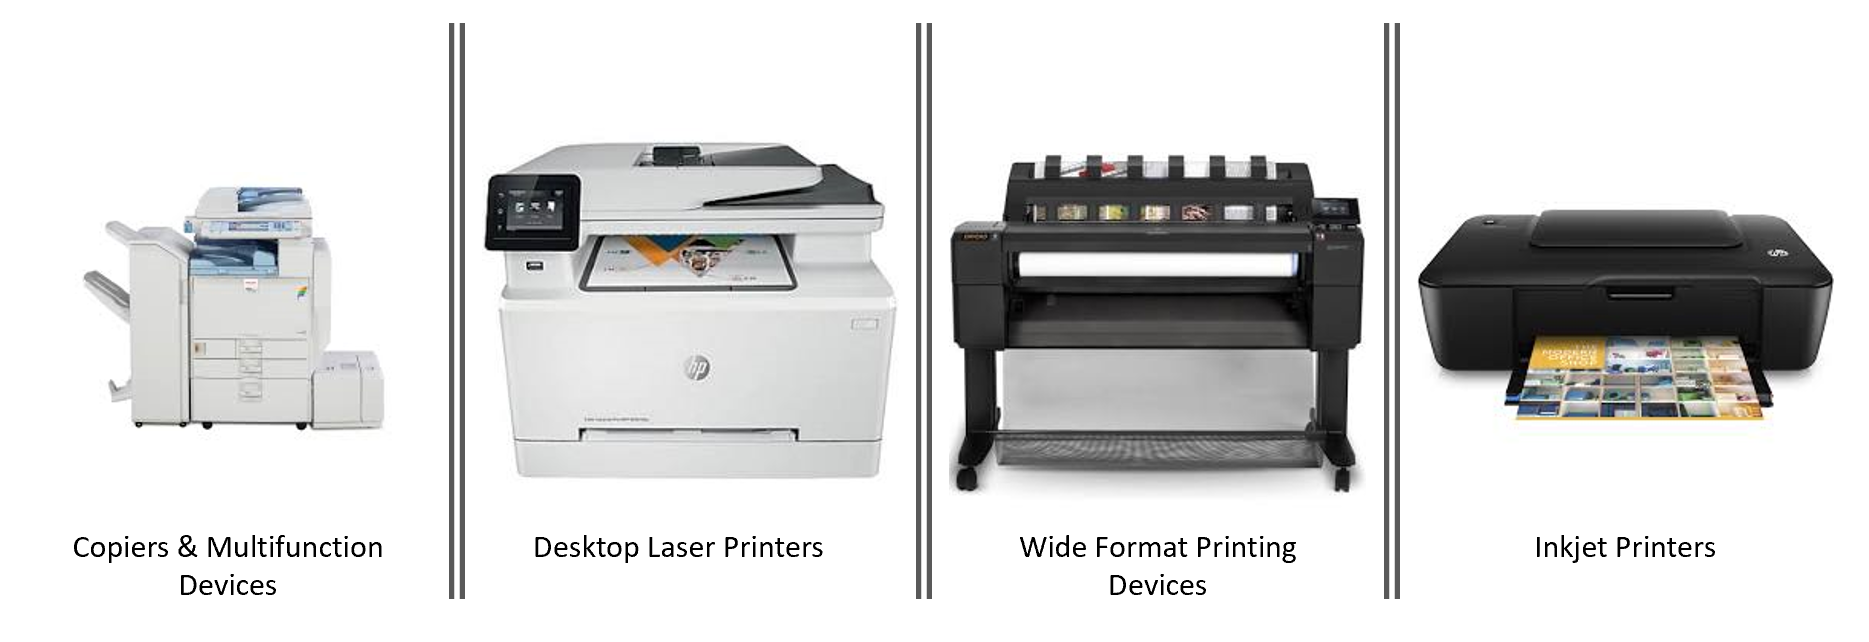 Printers And Its Types 6210